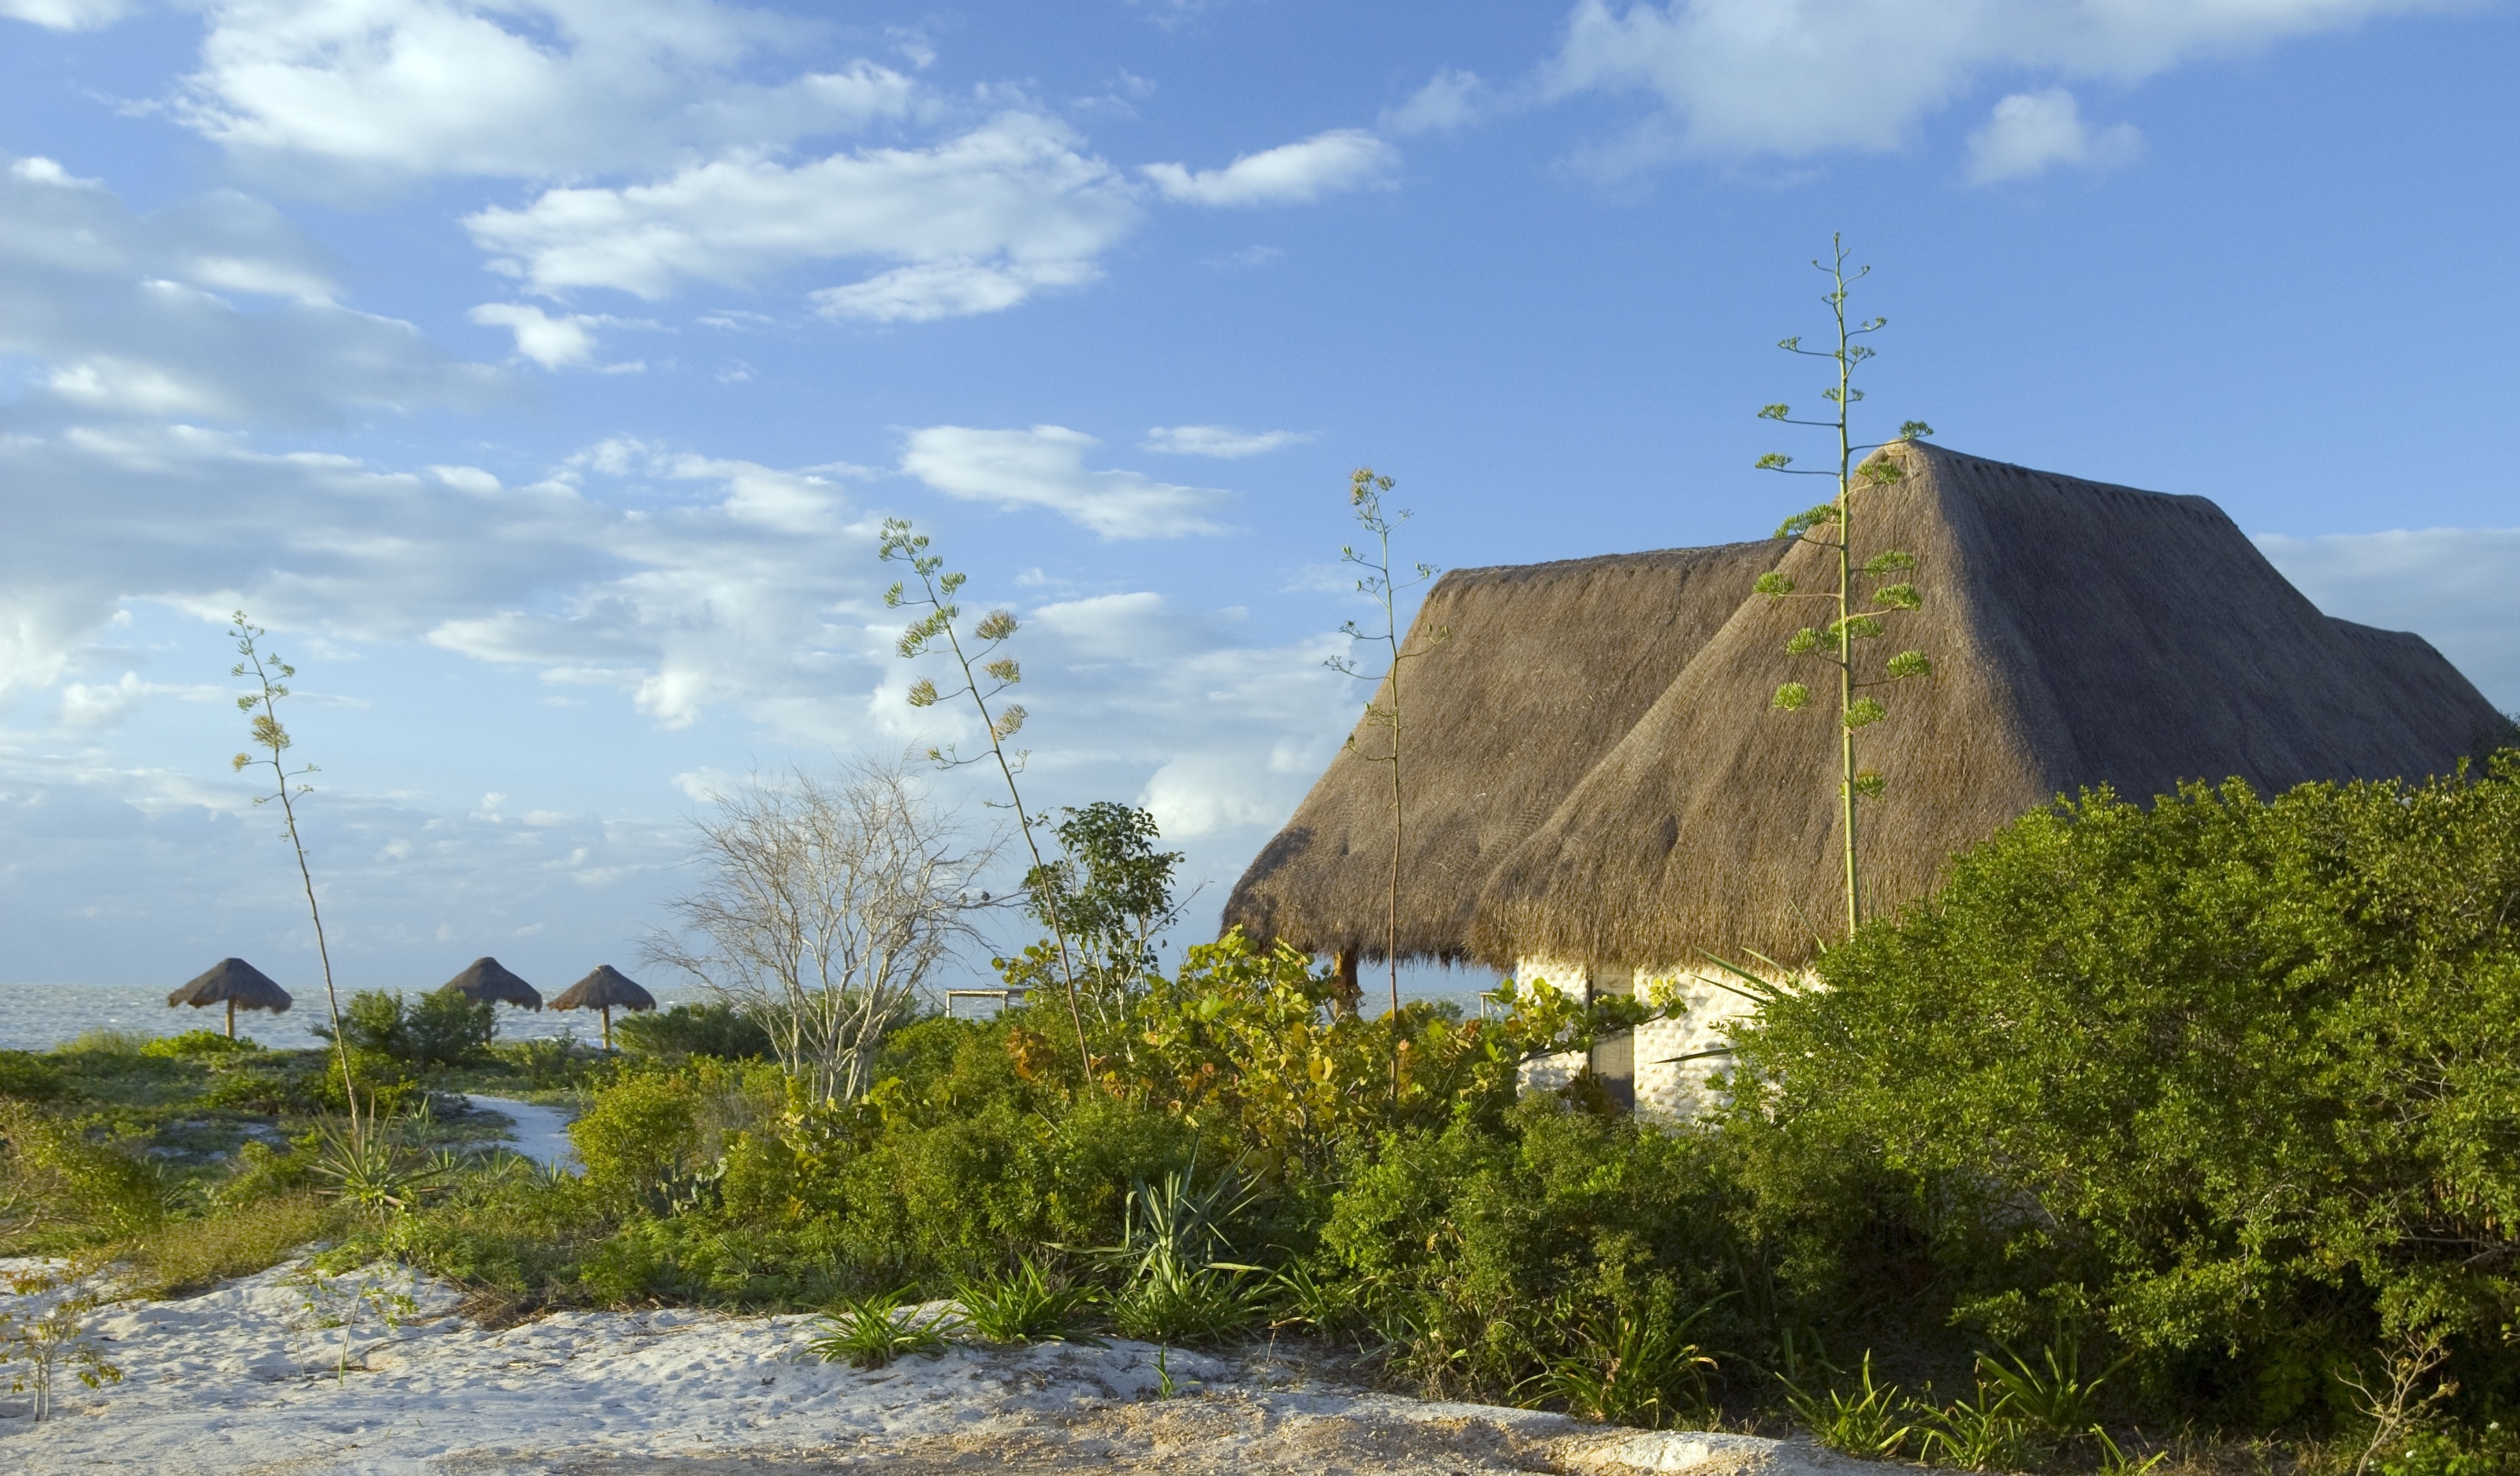 Relax in your seaside Mayan bungalow